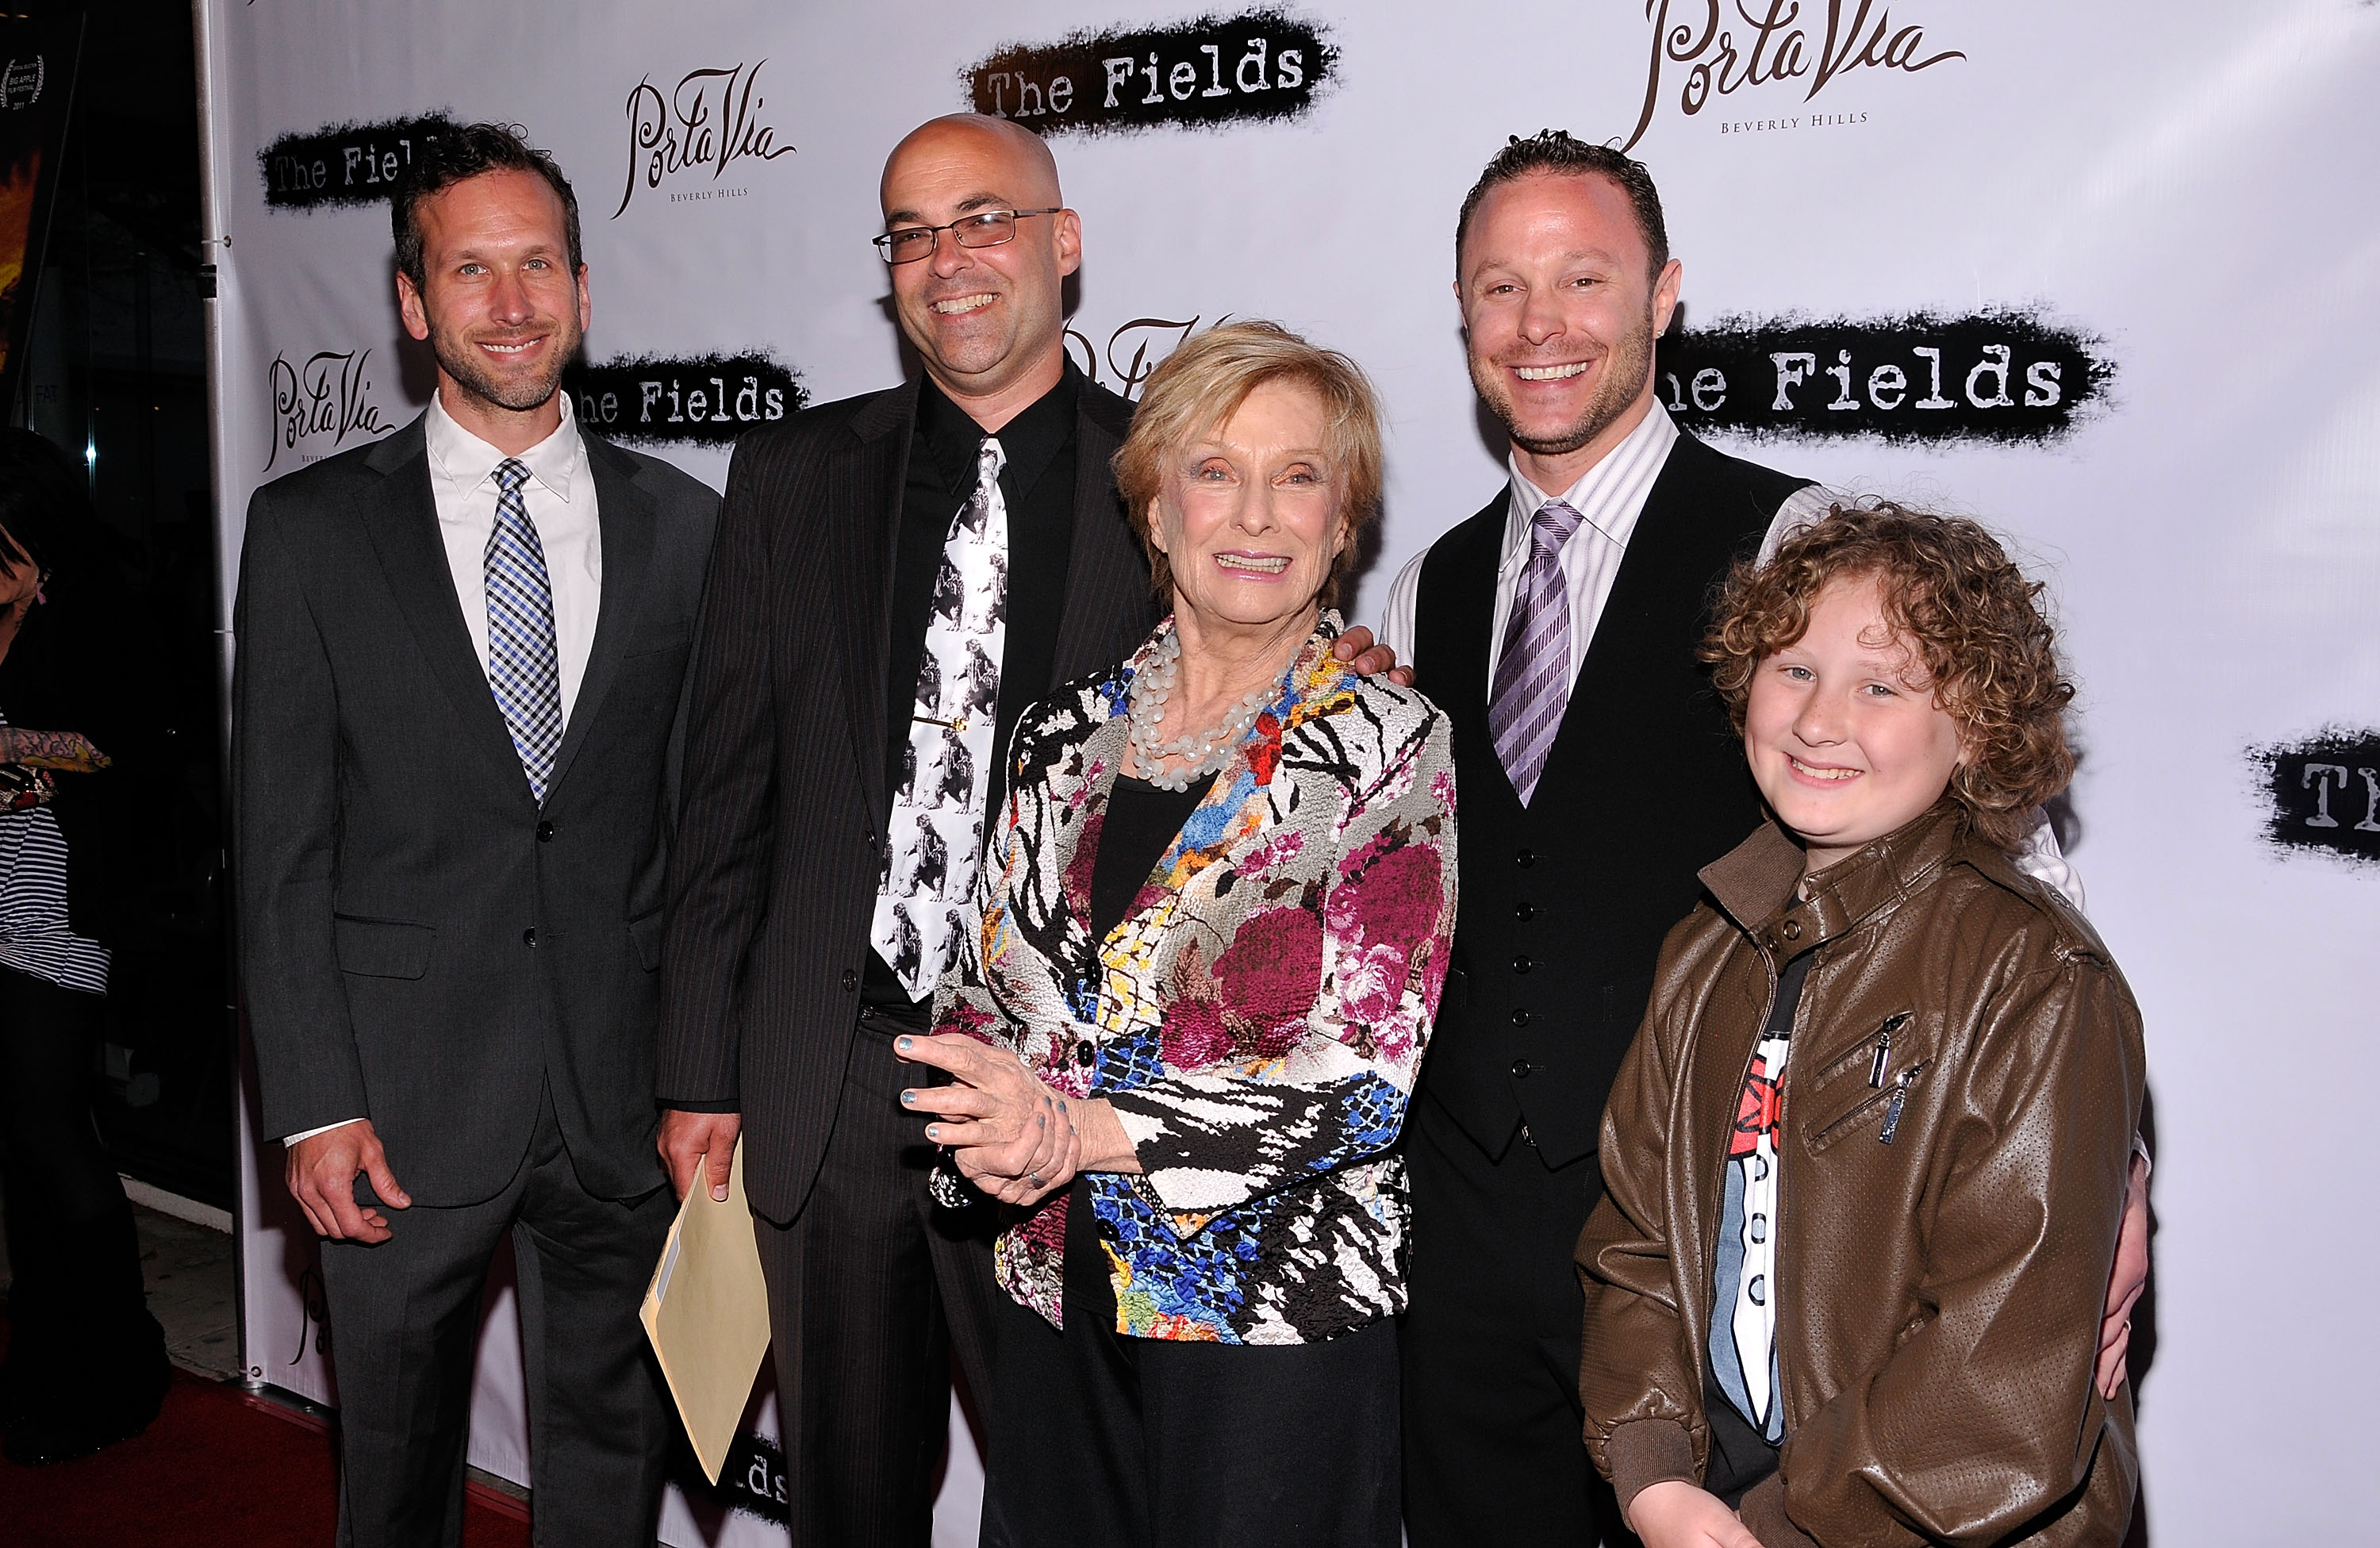 'The Fields' arrive at the world premiere of the new movie 'The Fields' at Laemmle Music Hall on April 17, 2012 in Beverly Hills, California.